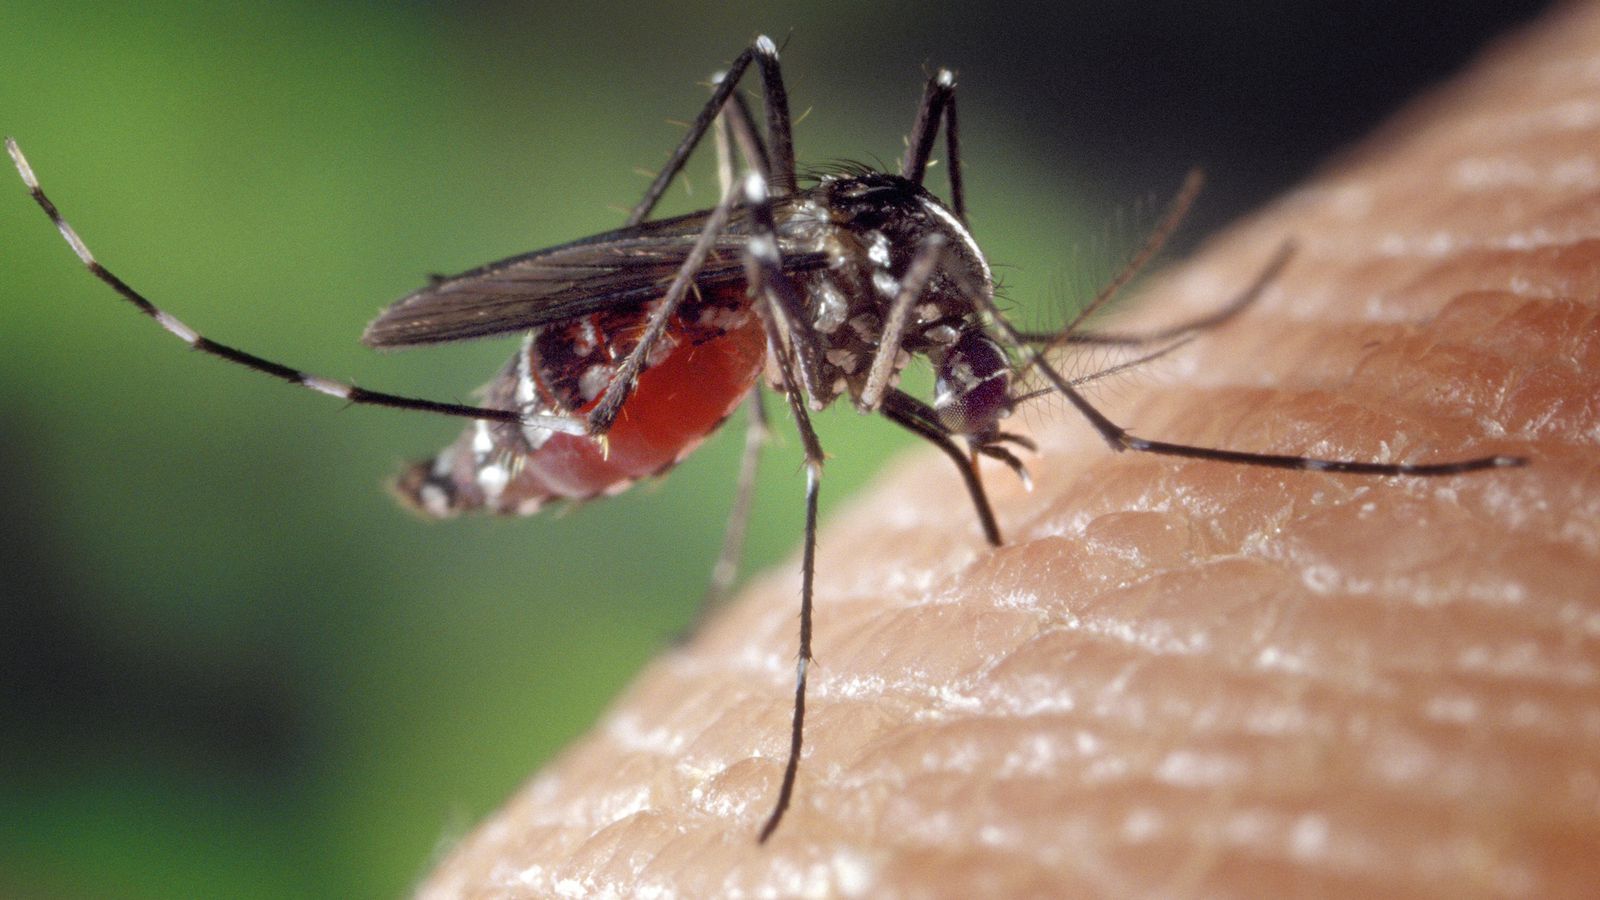 are mosquito bites dangerous learn the risks and how to protect yourself